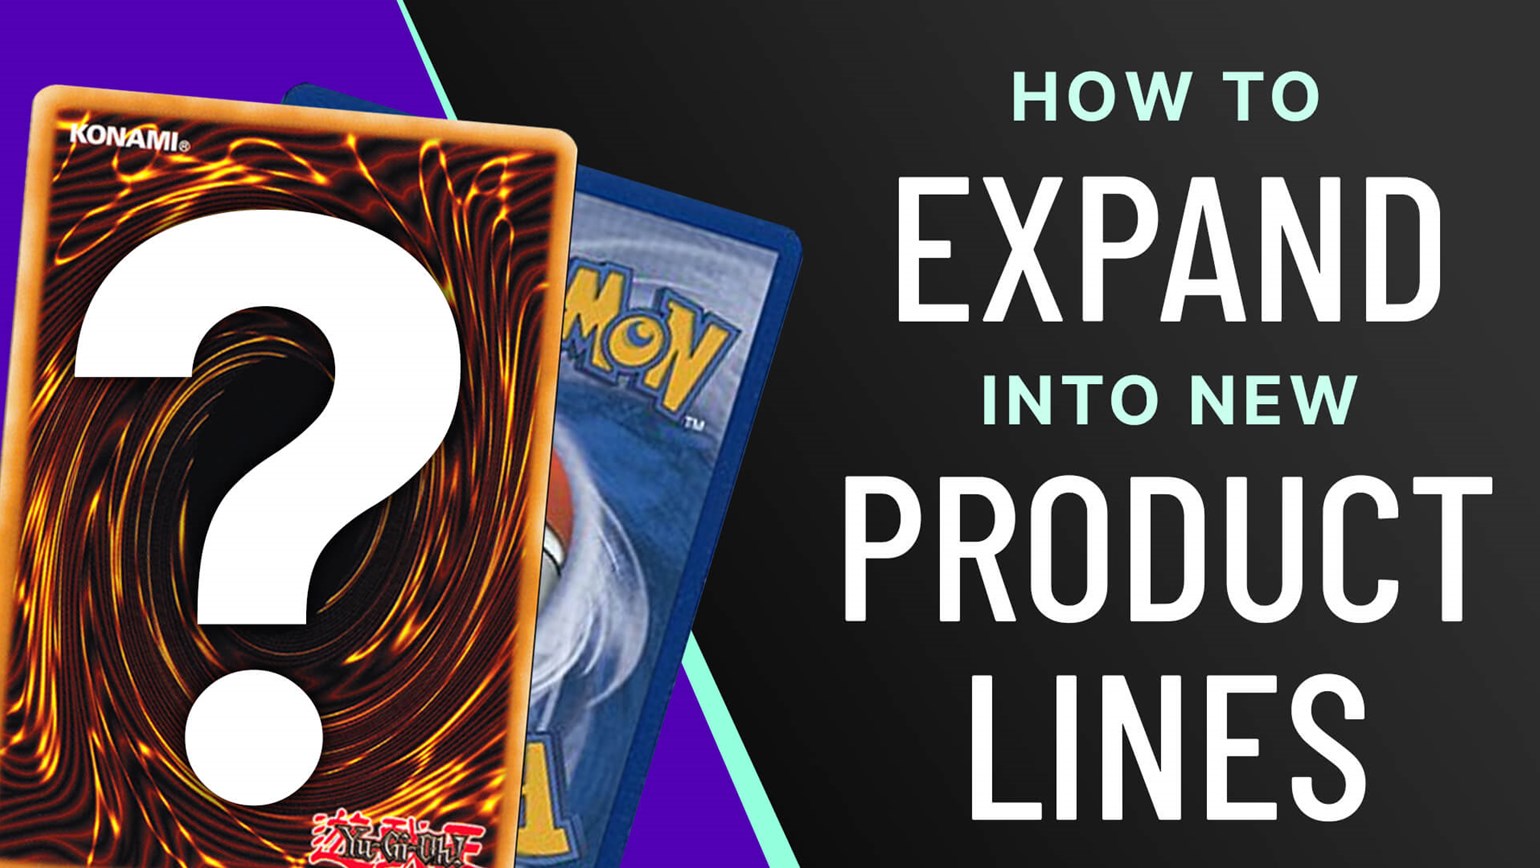 How To Expand Into New Product Lines